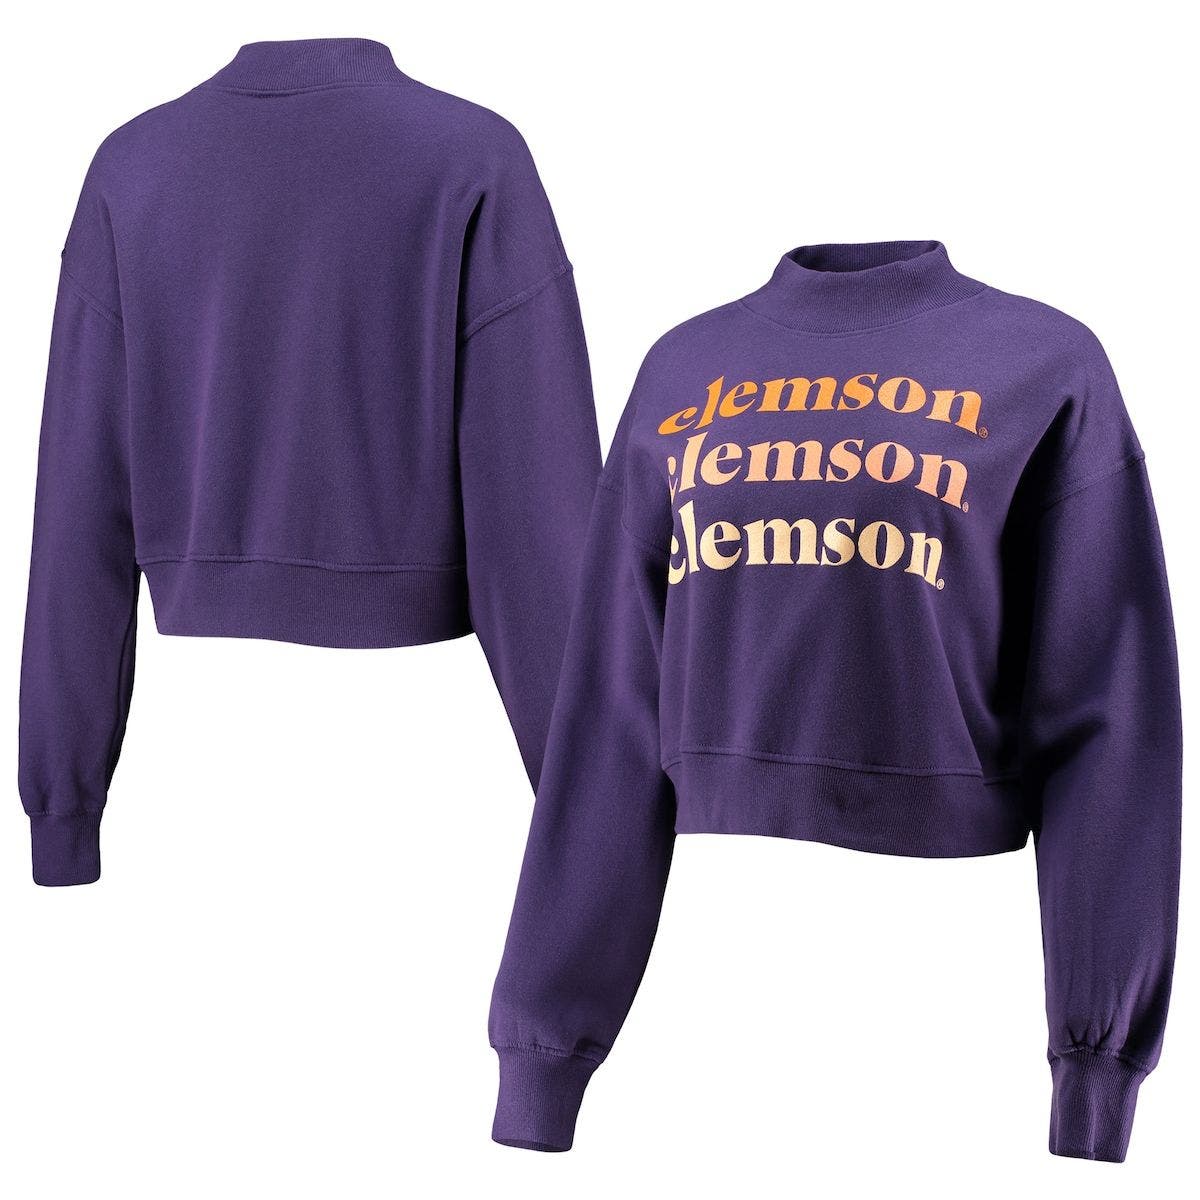 CHICKA-D Women's chicka-d Purple Clemson Tigers Heavyweight Hailey Cropped Sweatshirt at Nordstrom